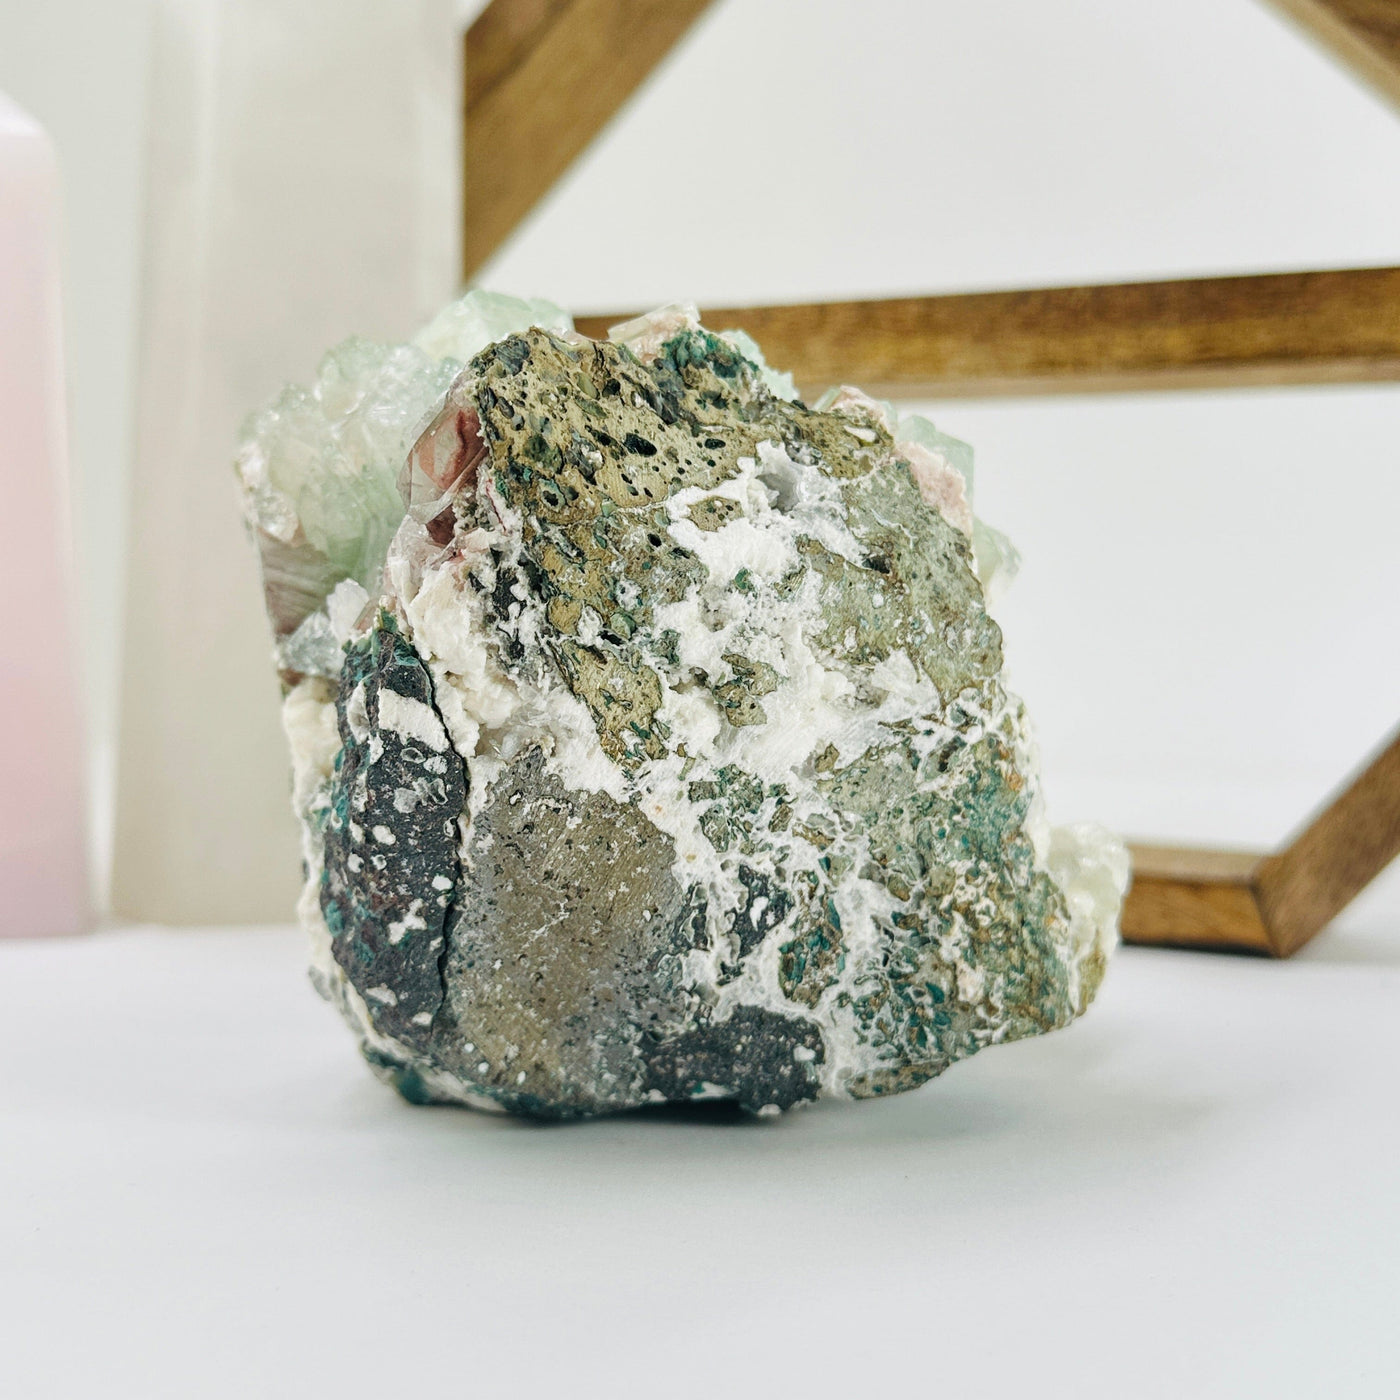 apophyllite with decorations in the background